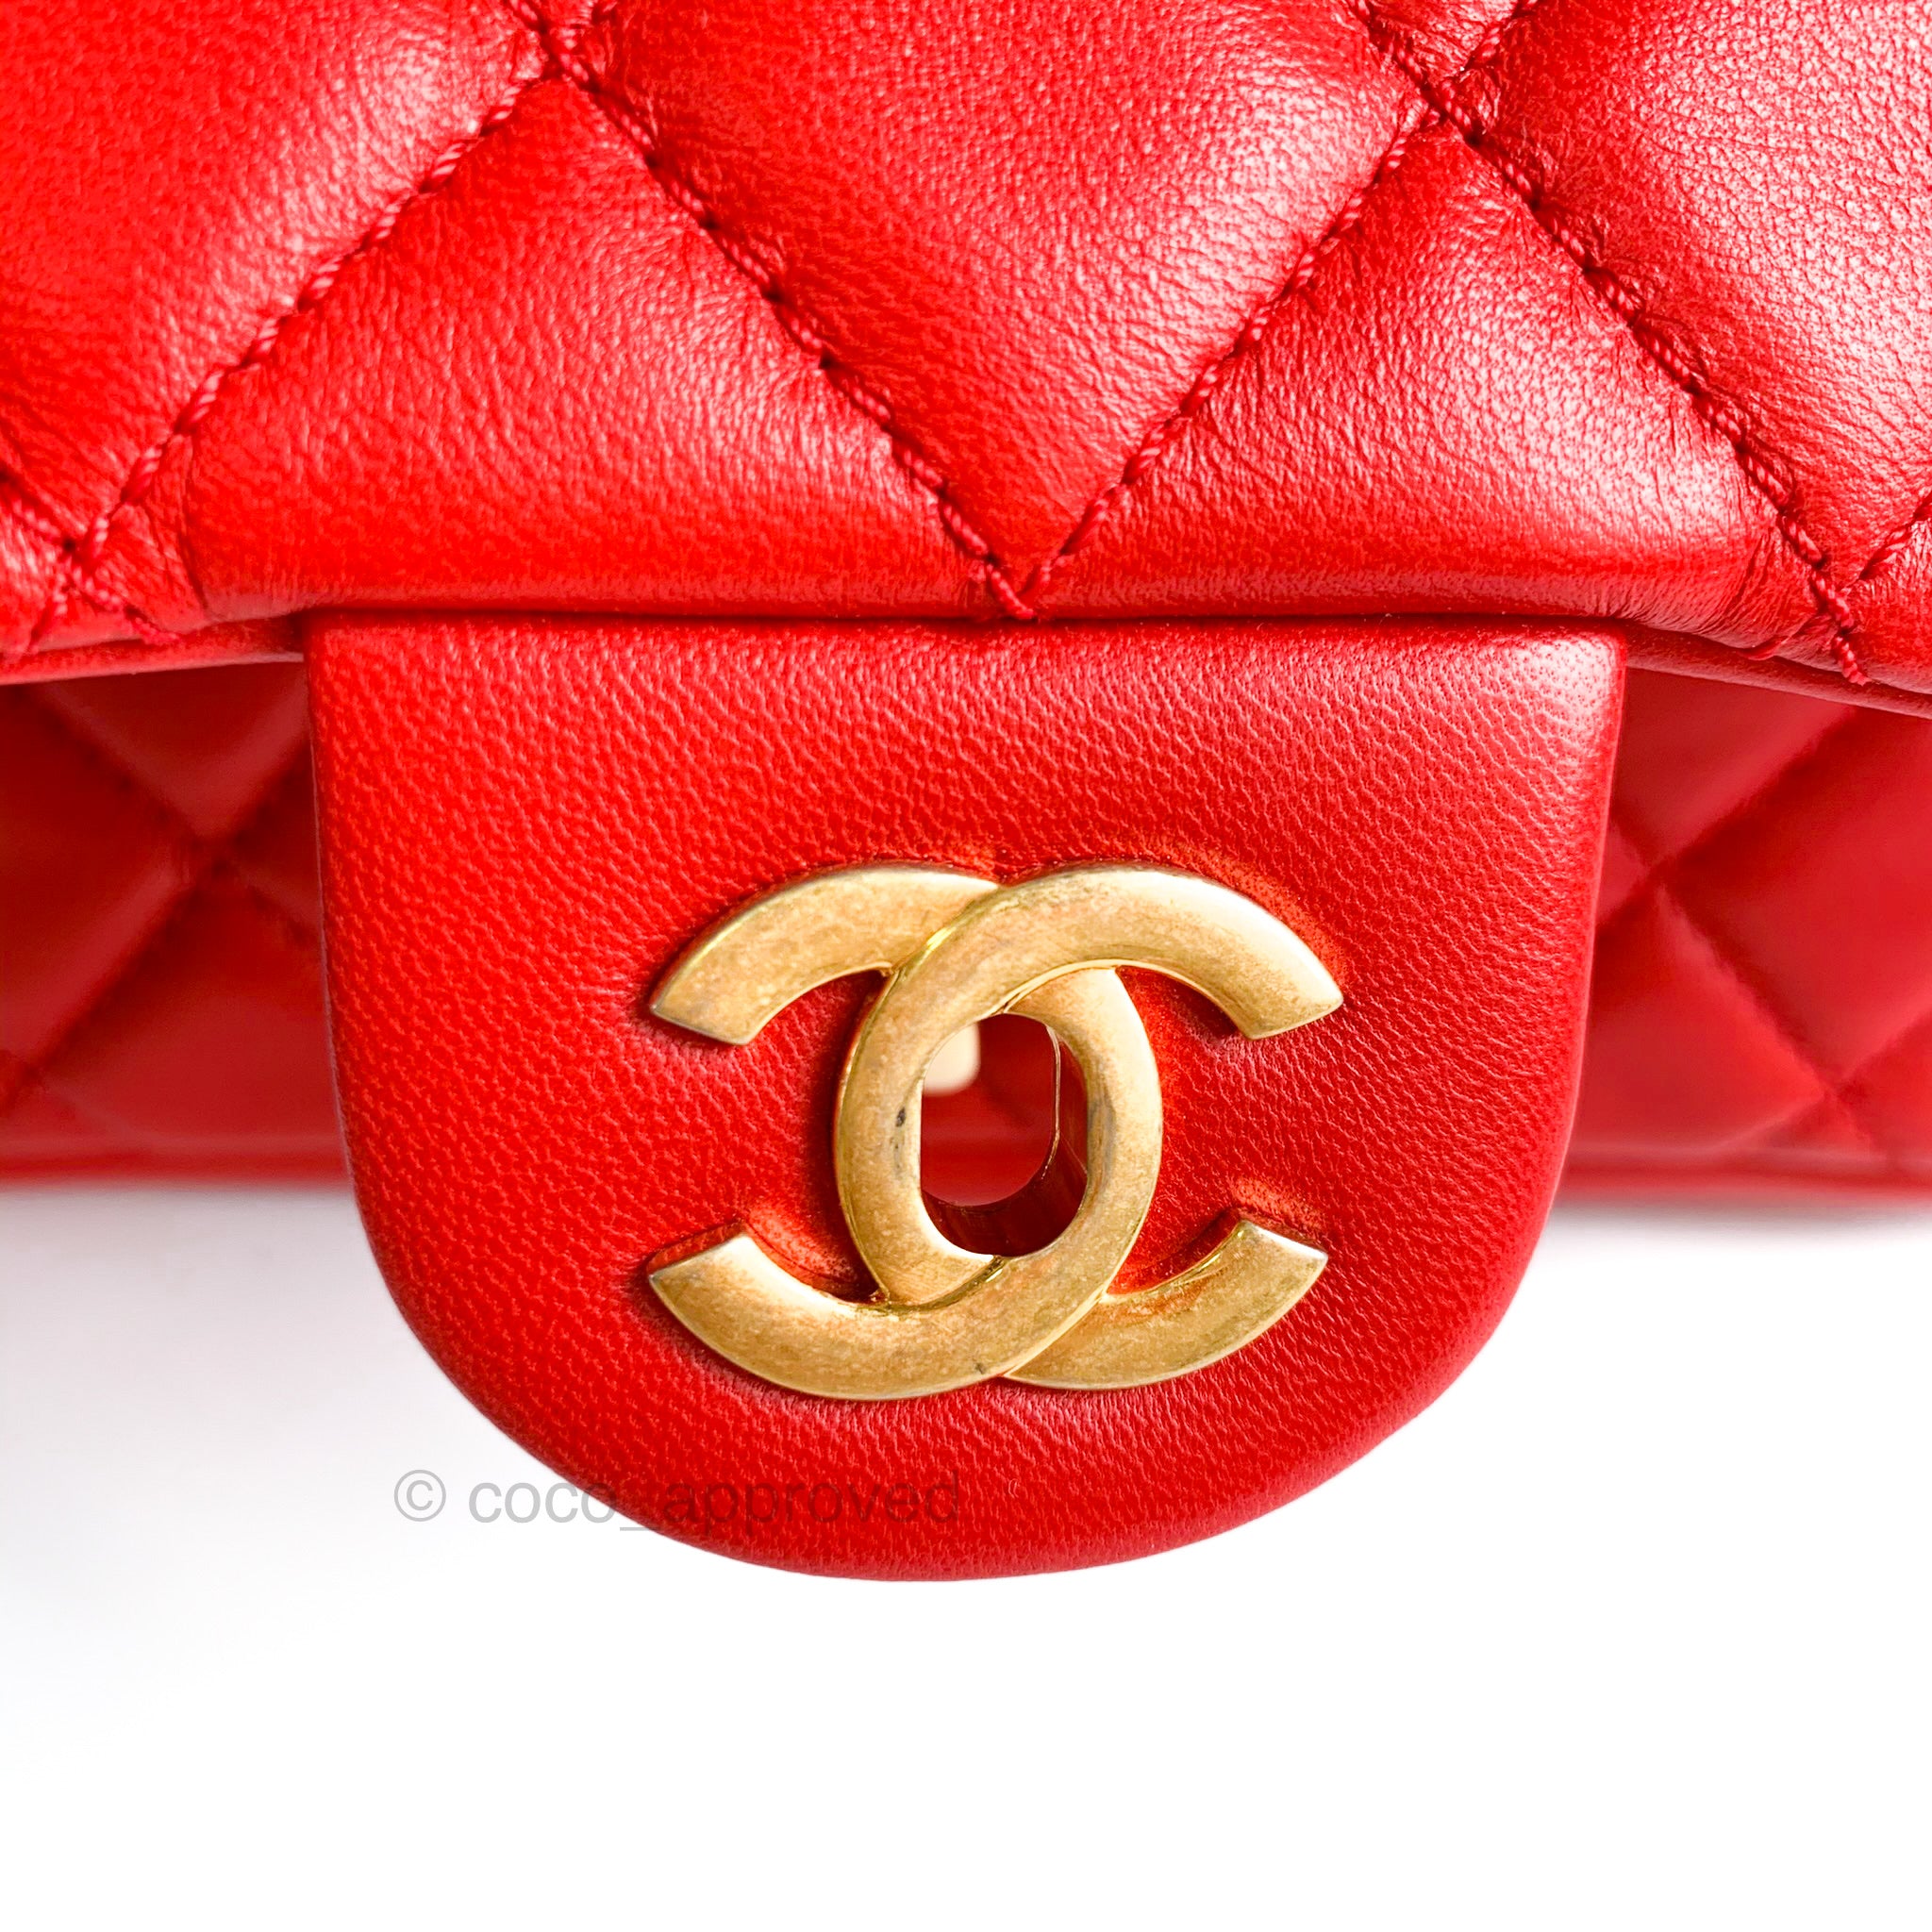 Vintage Chanel Small Flap Bag Red Satin Gold Hardware